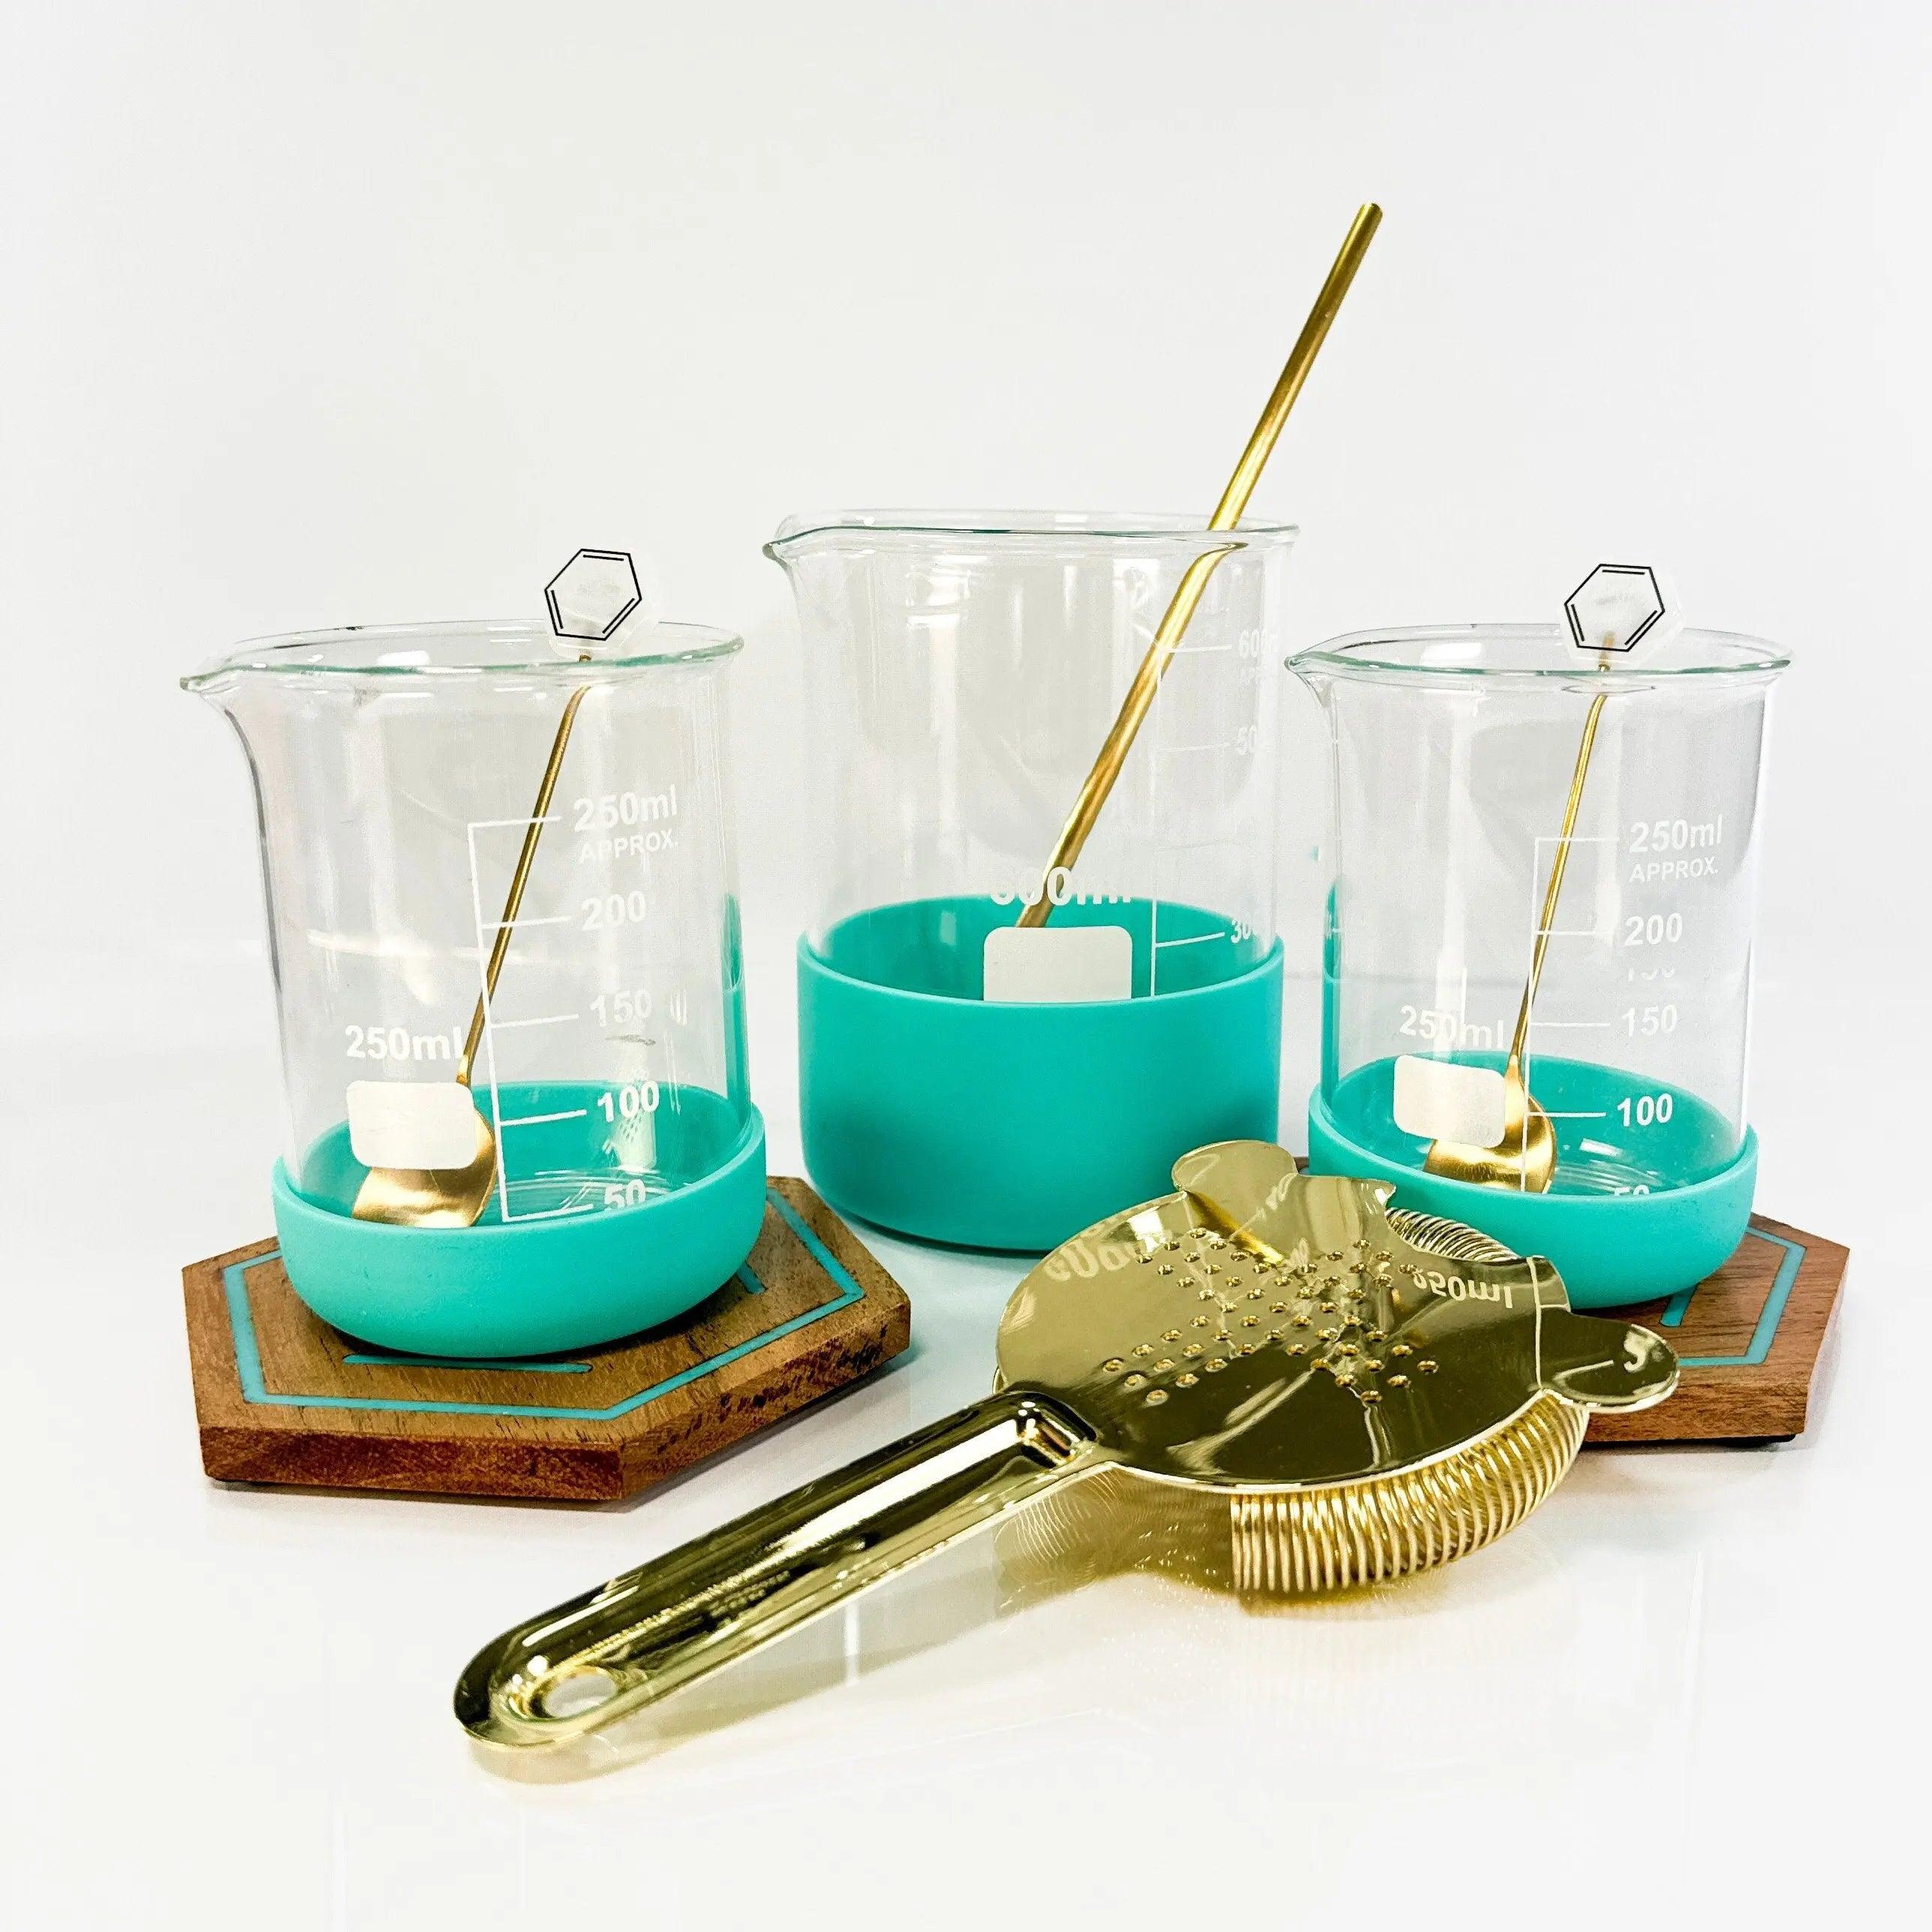 Chemistry Mixing & Glassware Set | Science Gift Set